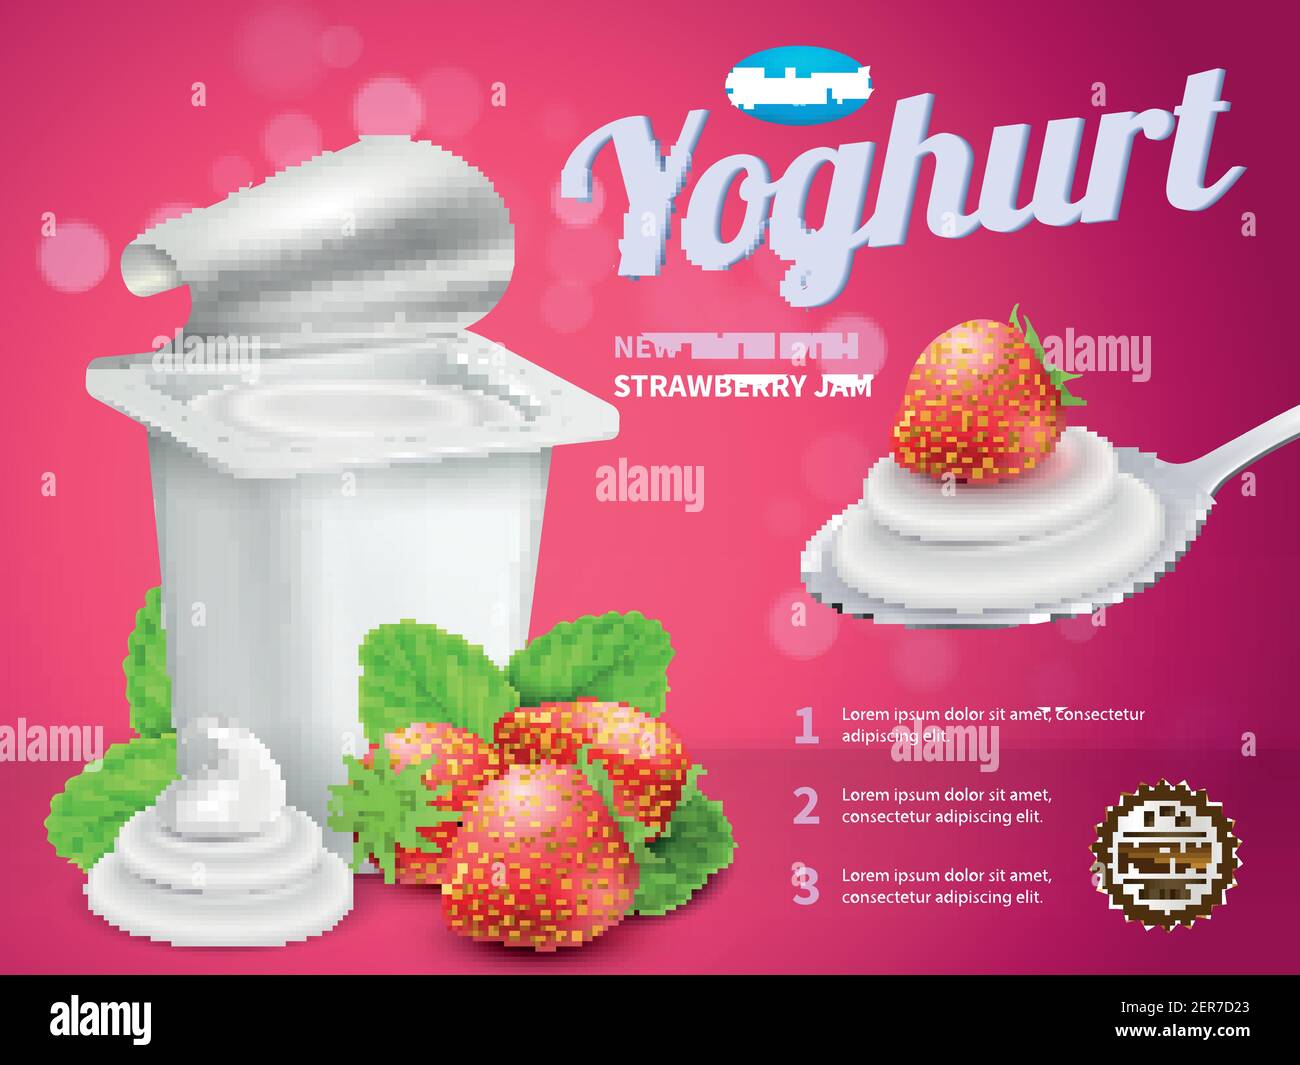 Yoghurt Package Advertising Composition With Strawberry Yoghurt Symbols